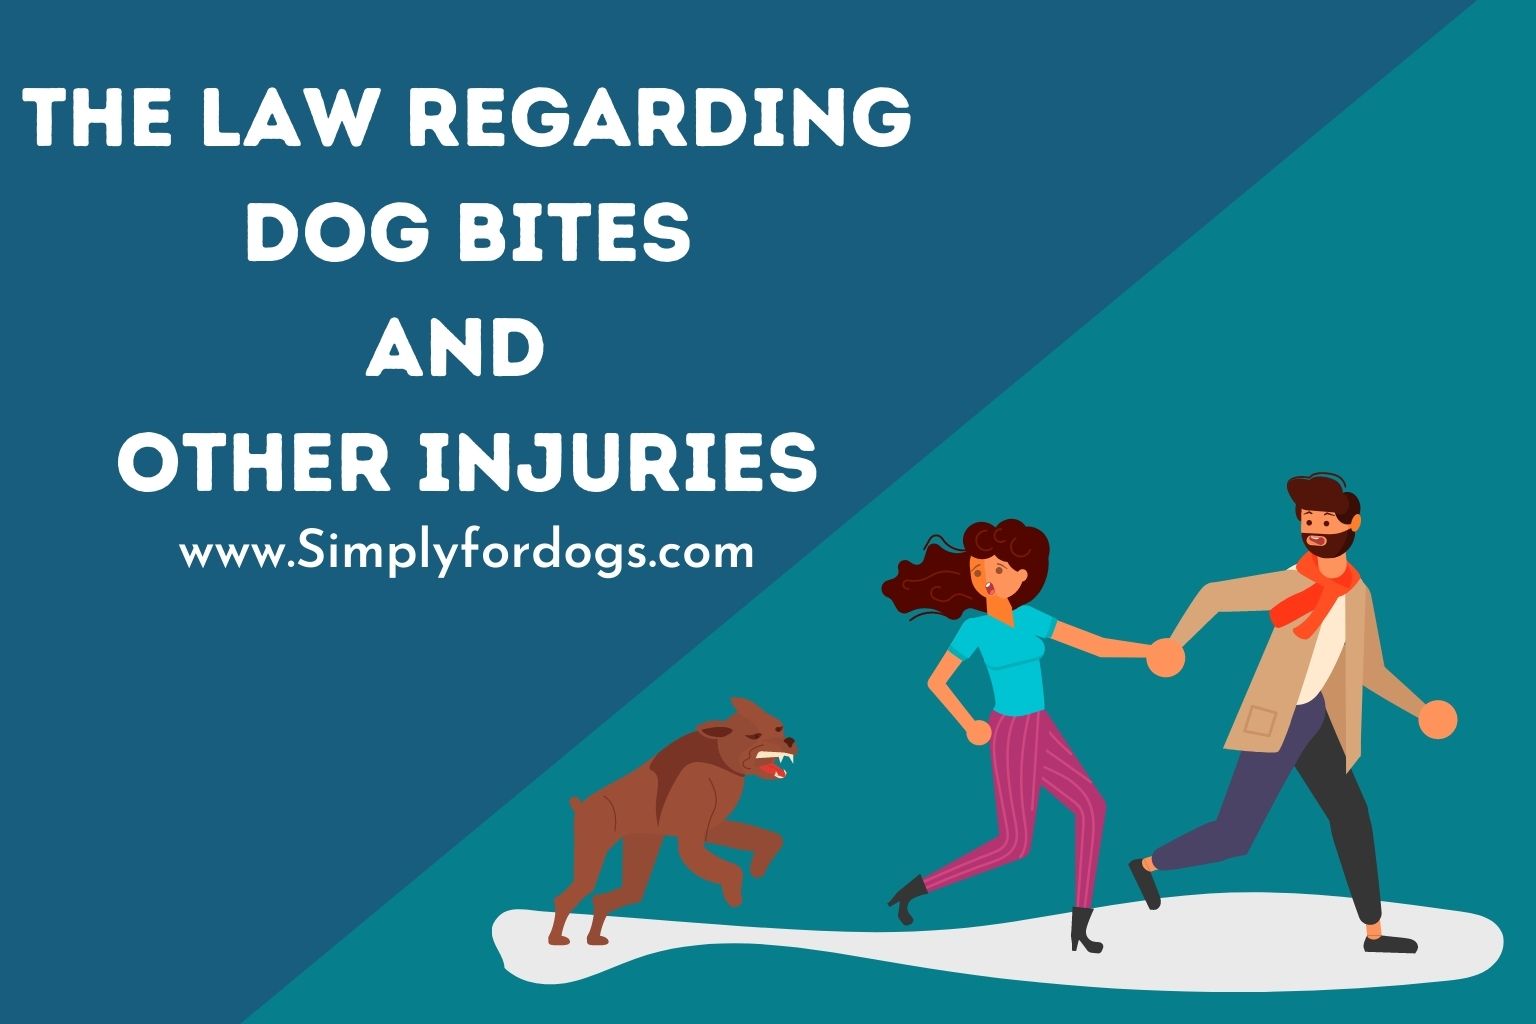 The Law Regarding Dog Bites and Other Injuries